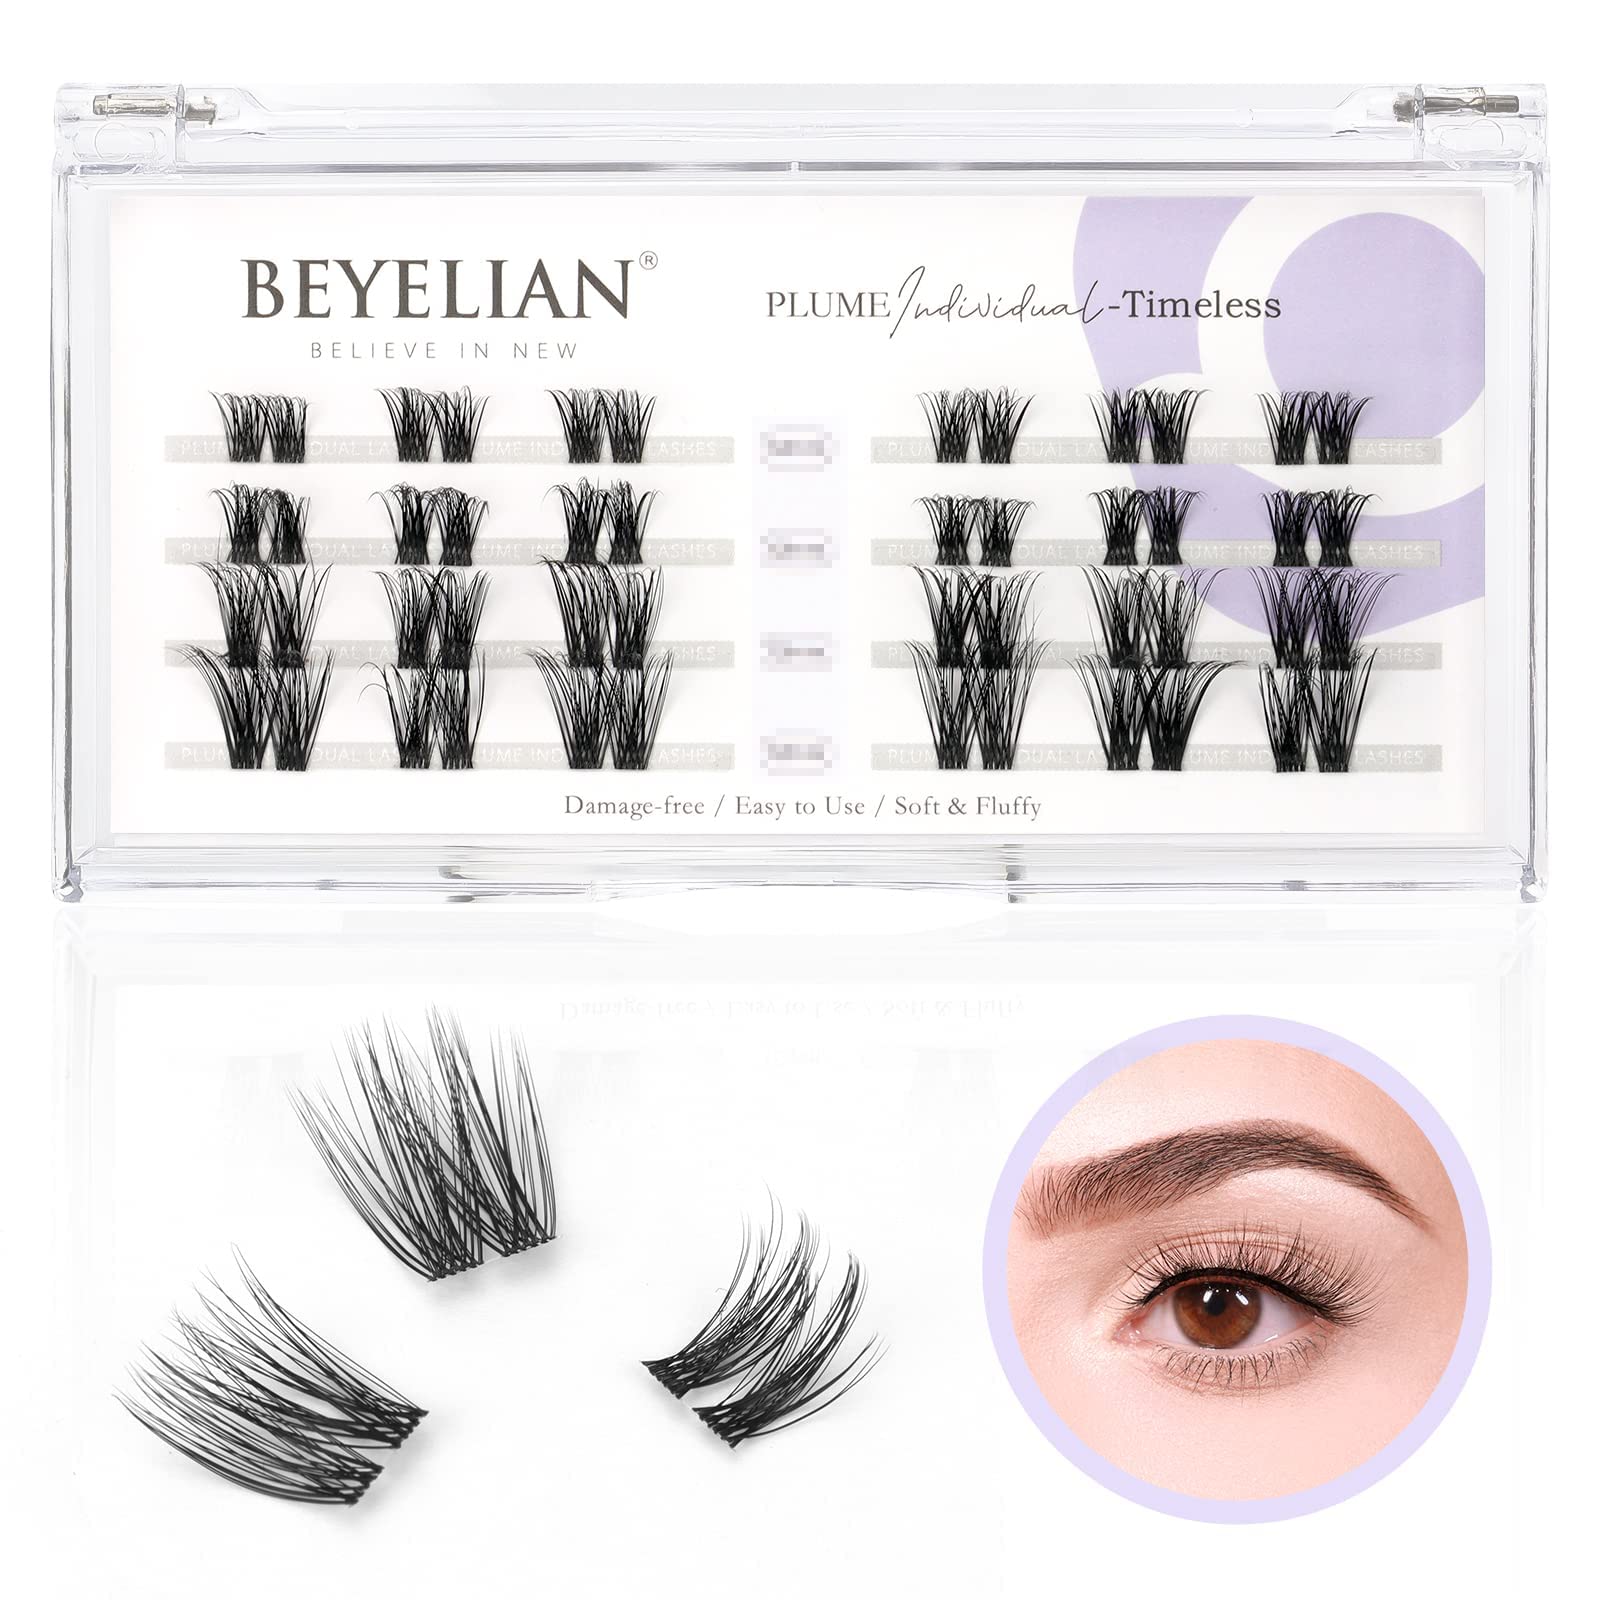 BEYELIAN DIY Eyelash Extension,Cluster Lashes Individual False Eyelashes Extension Natural Look Reusable Glue Bonded Super Thin Clear Band 24 Lash Clusters (Style2 0.07 Mix Clear Band)